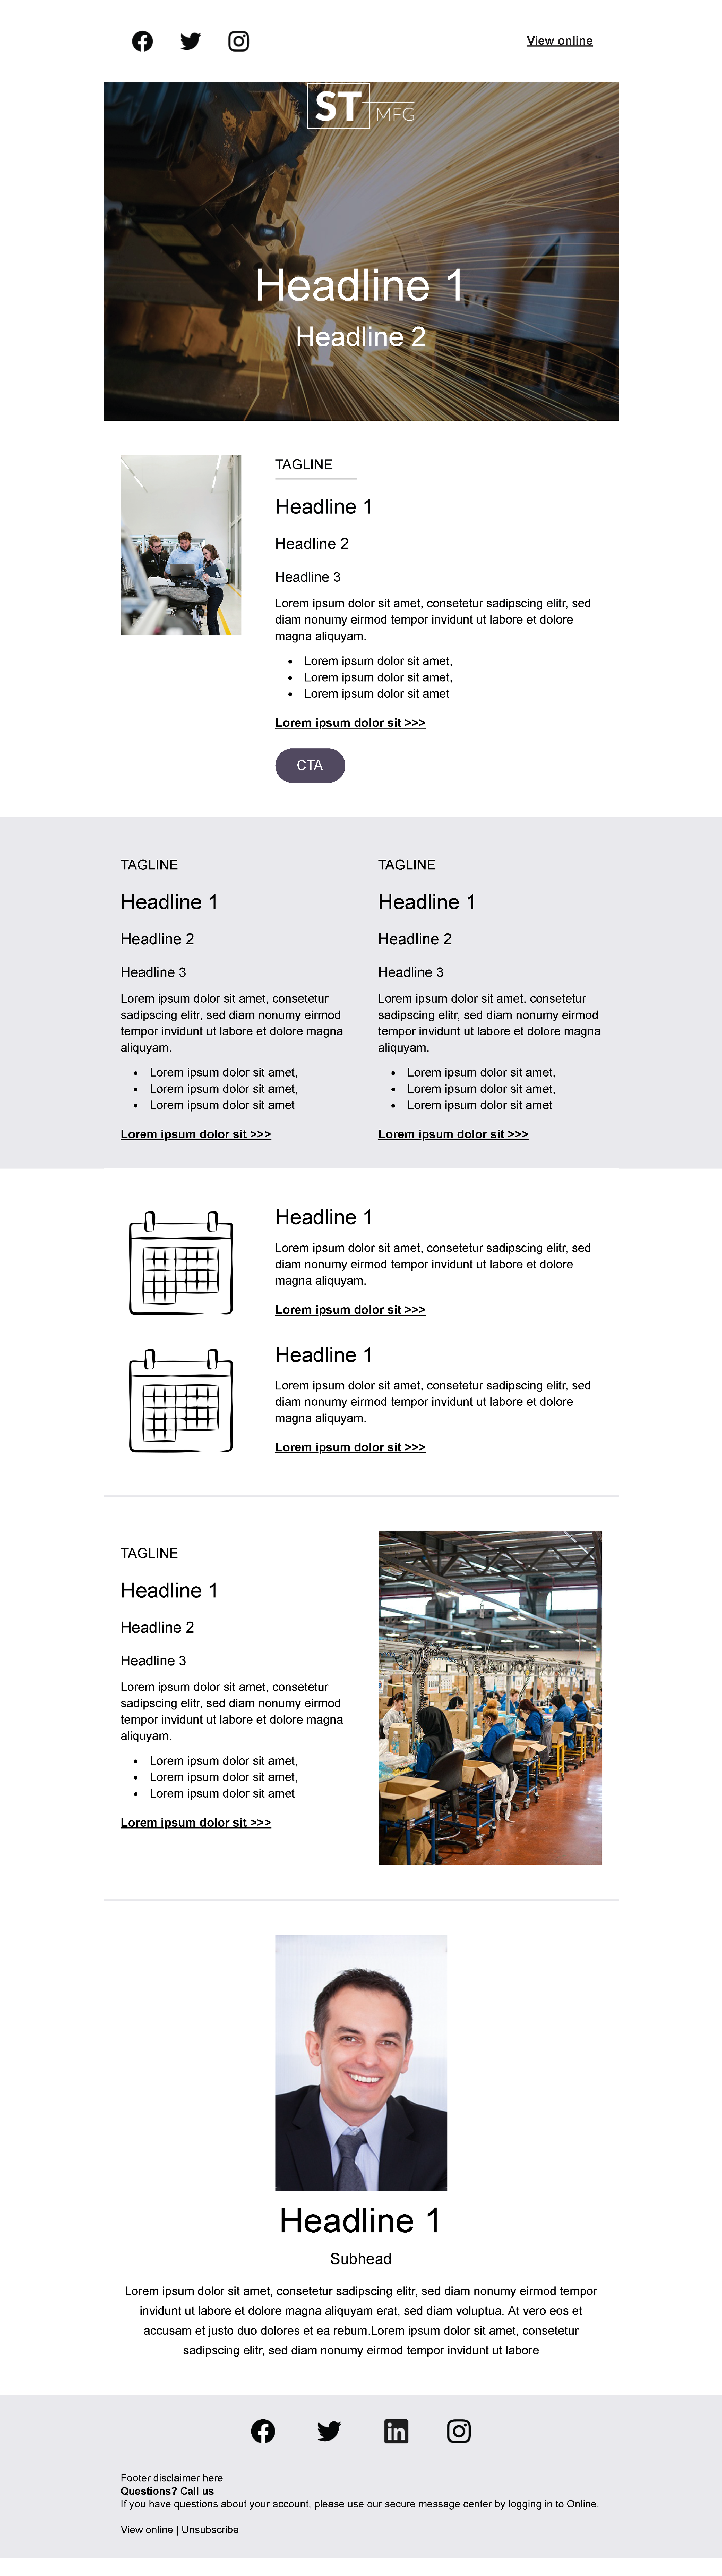 Newsletter template 1 for manufacturing companies